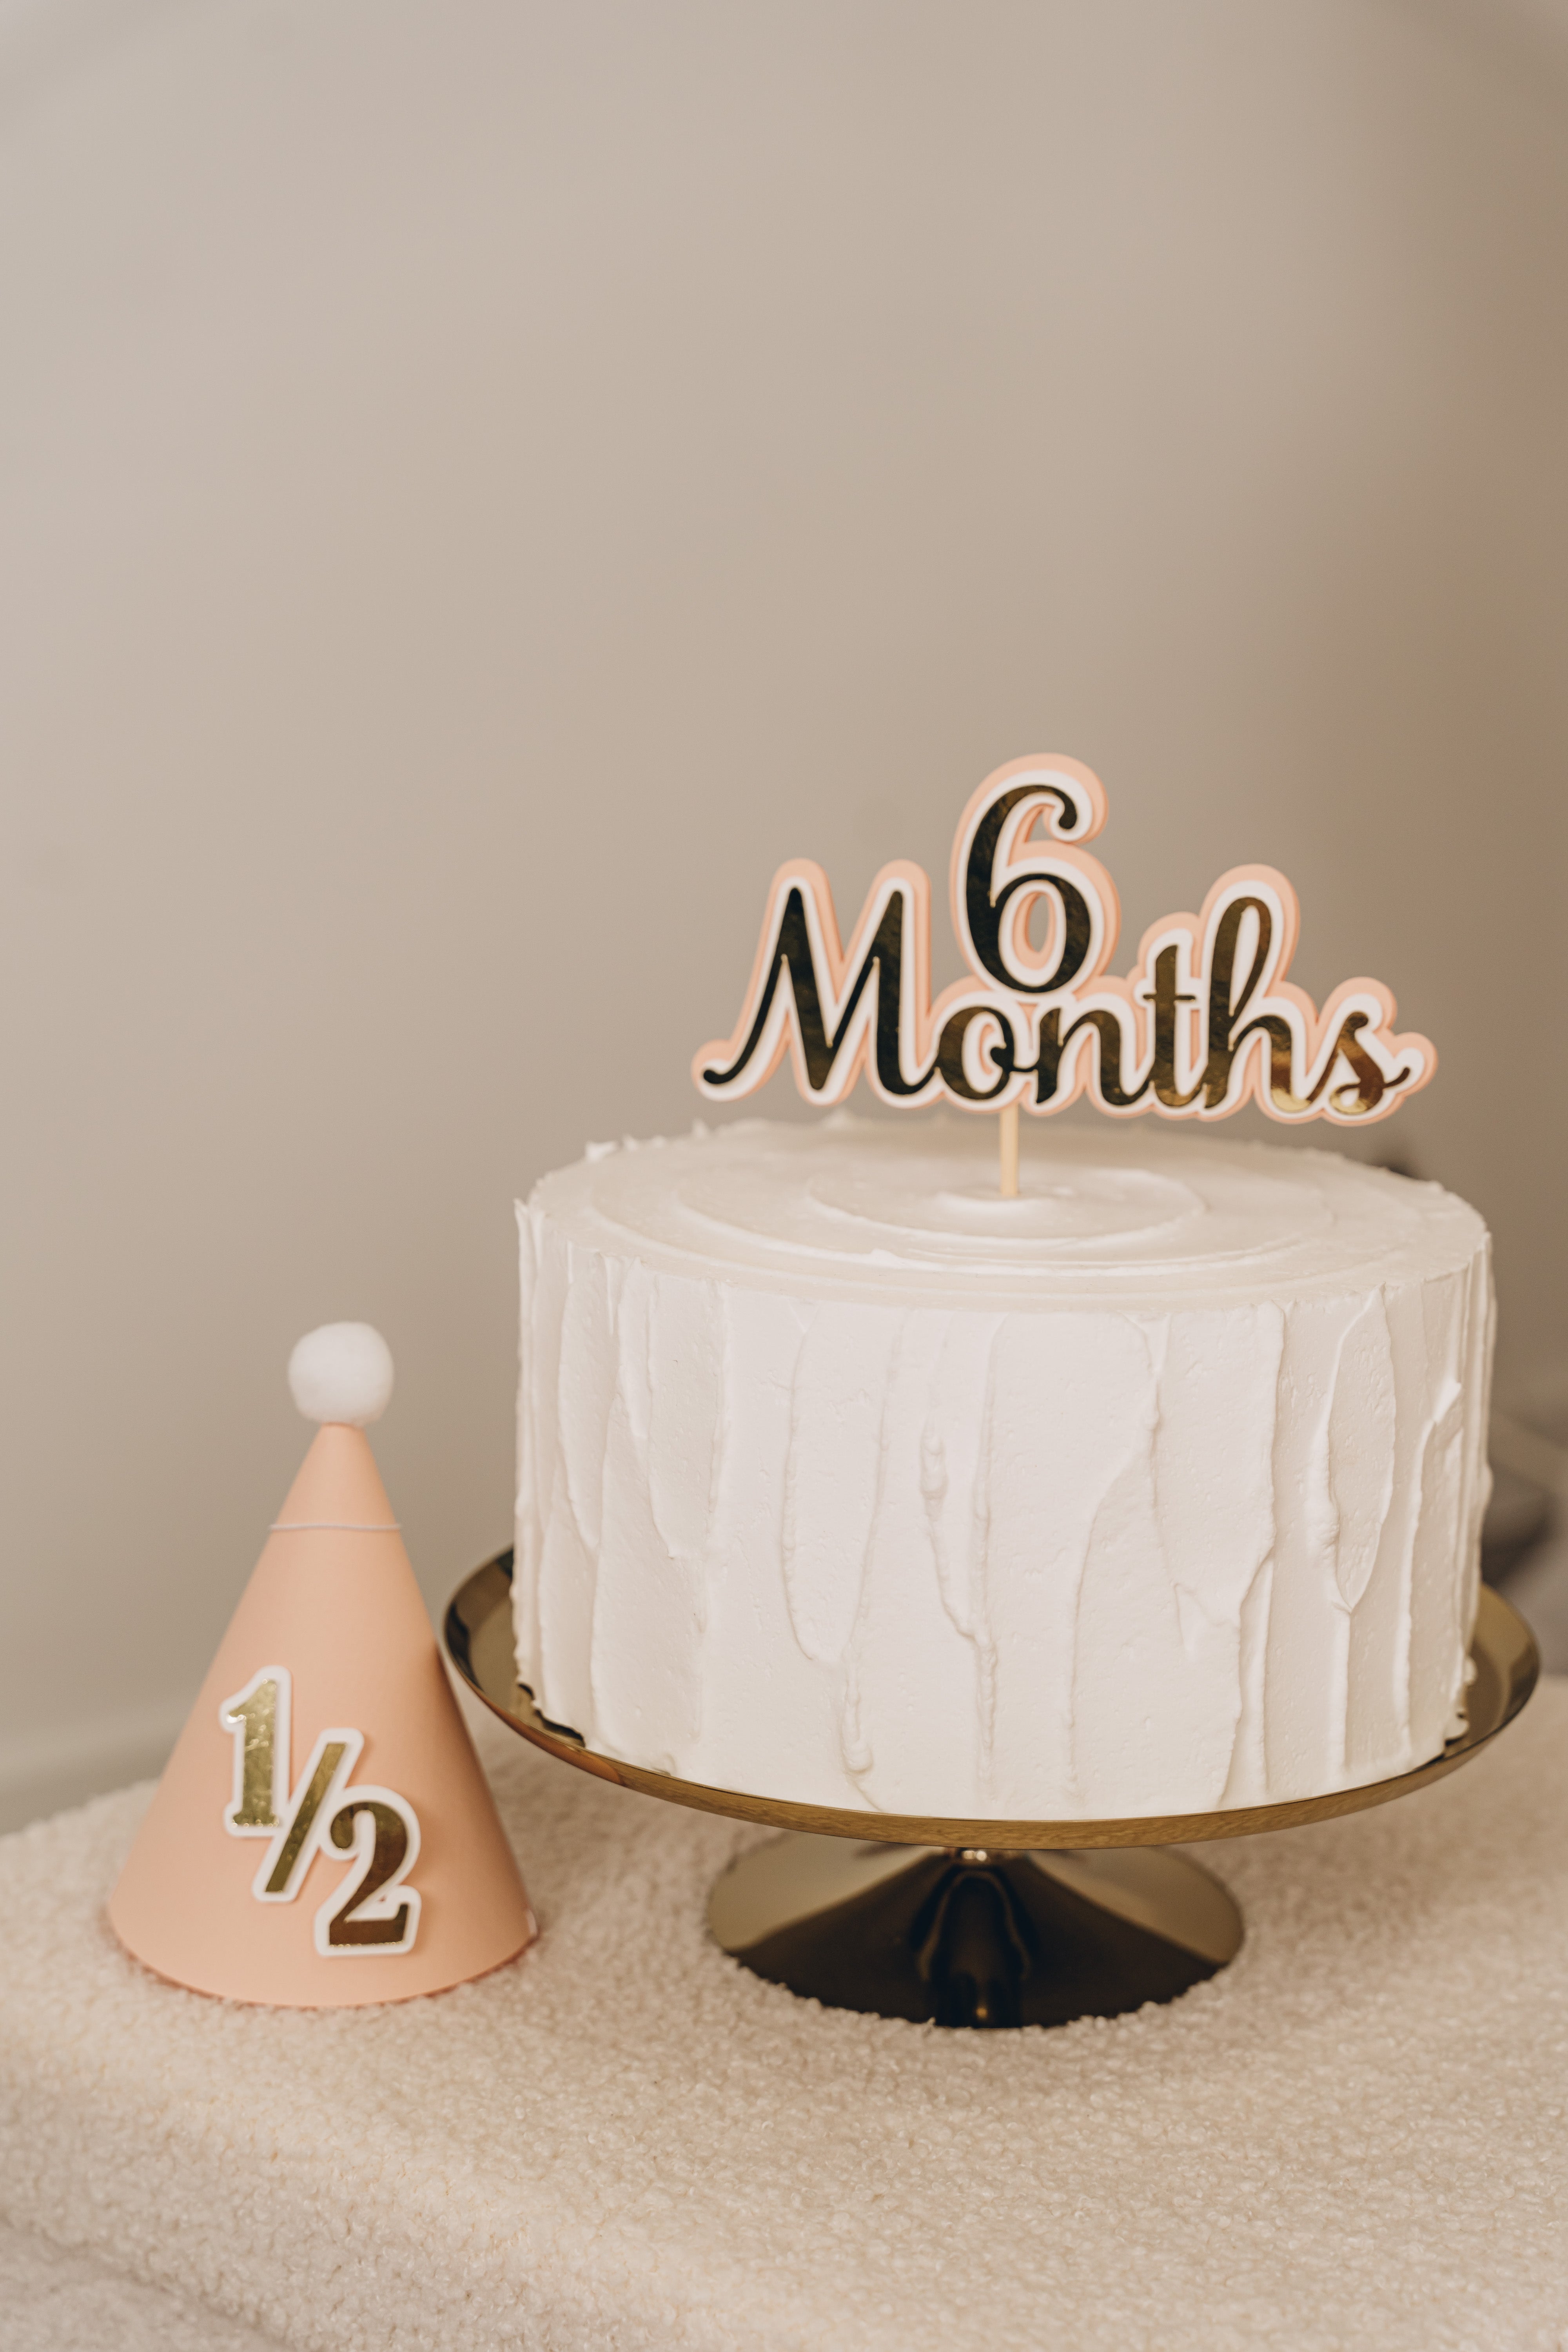 NUMBER CAKE FOR 2 MONTHS OLD BABY... - Sweet Craft by Fritch | Facebook